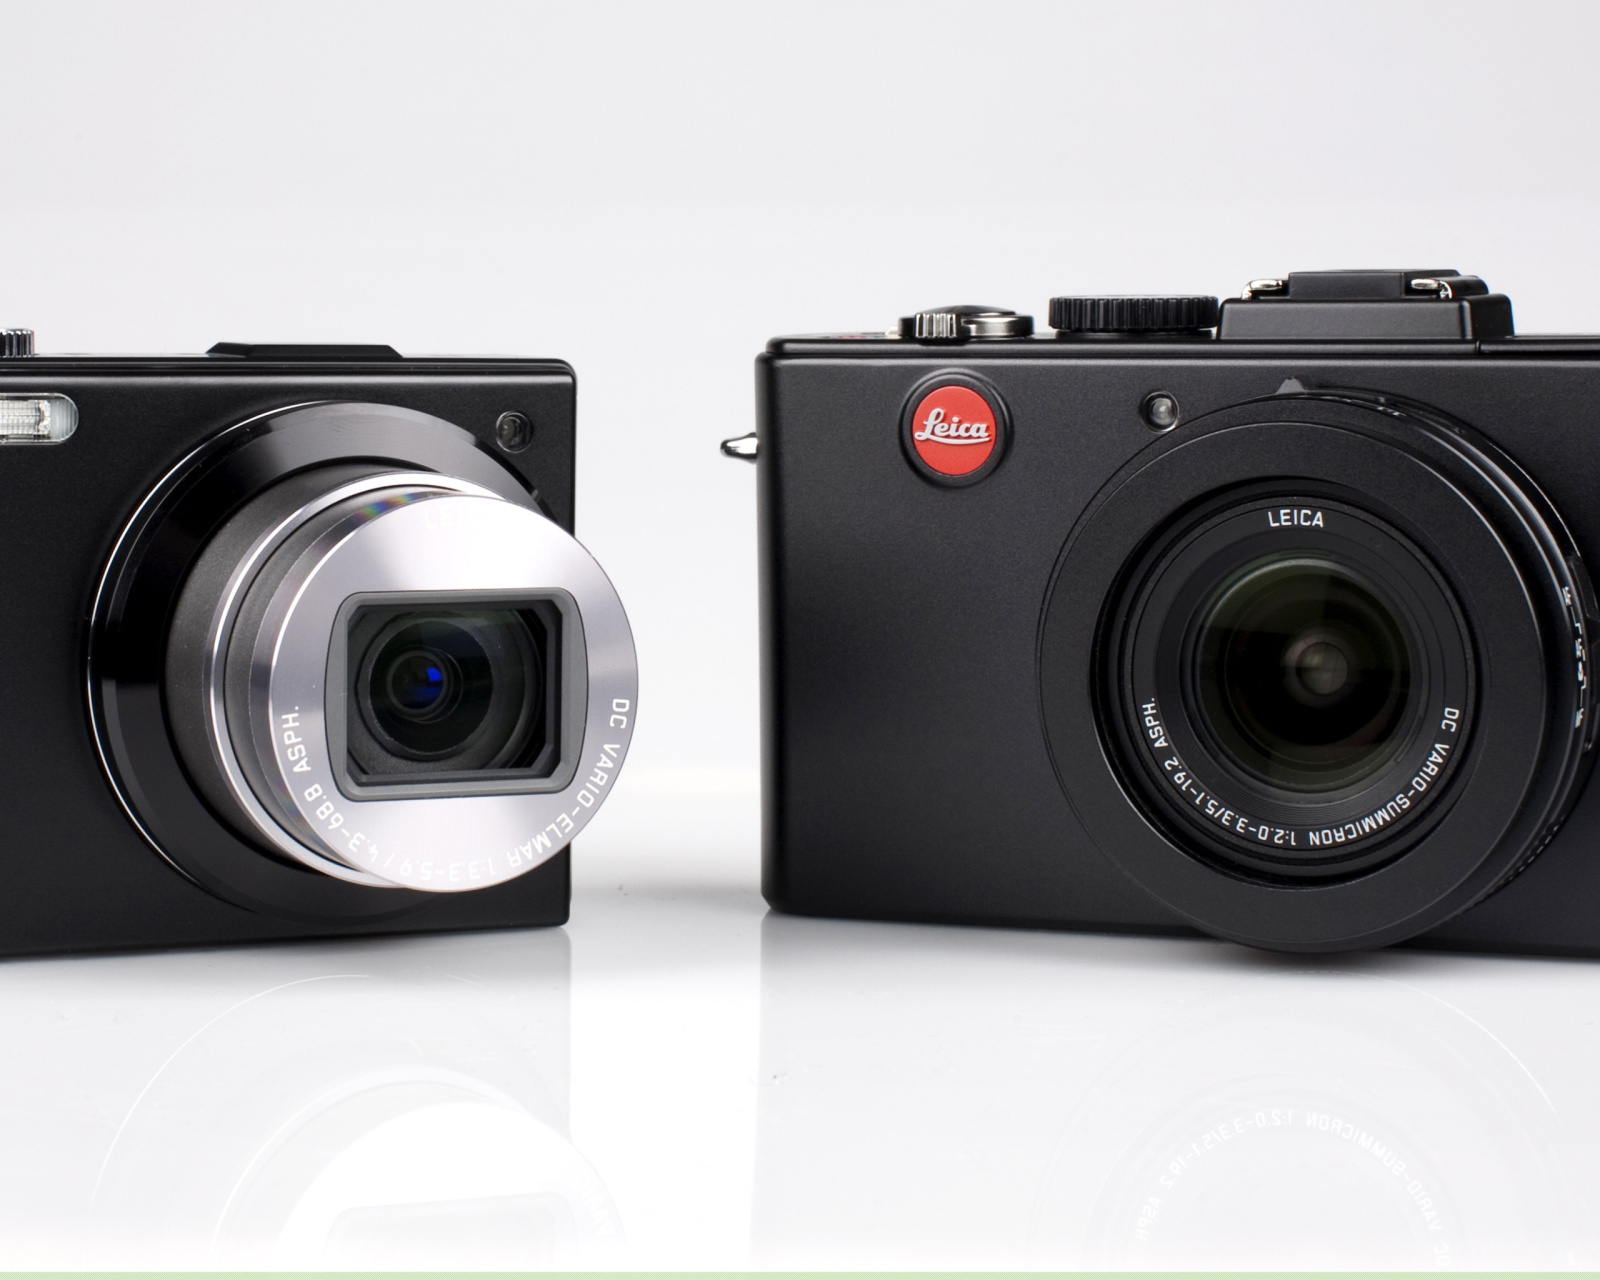 Leica D Lux 5 and Leica V LUX 1 wallpaper 1600x1280